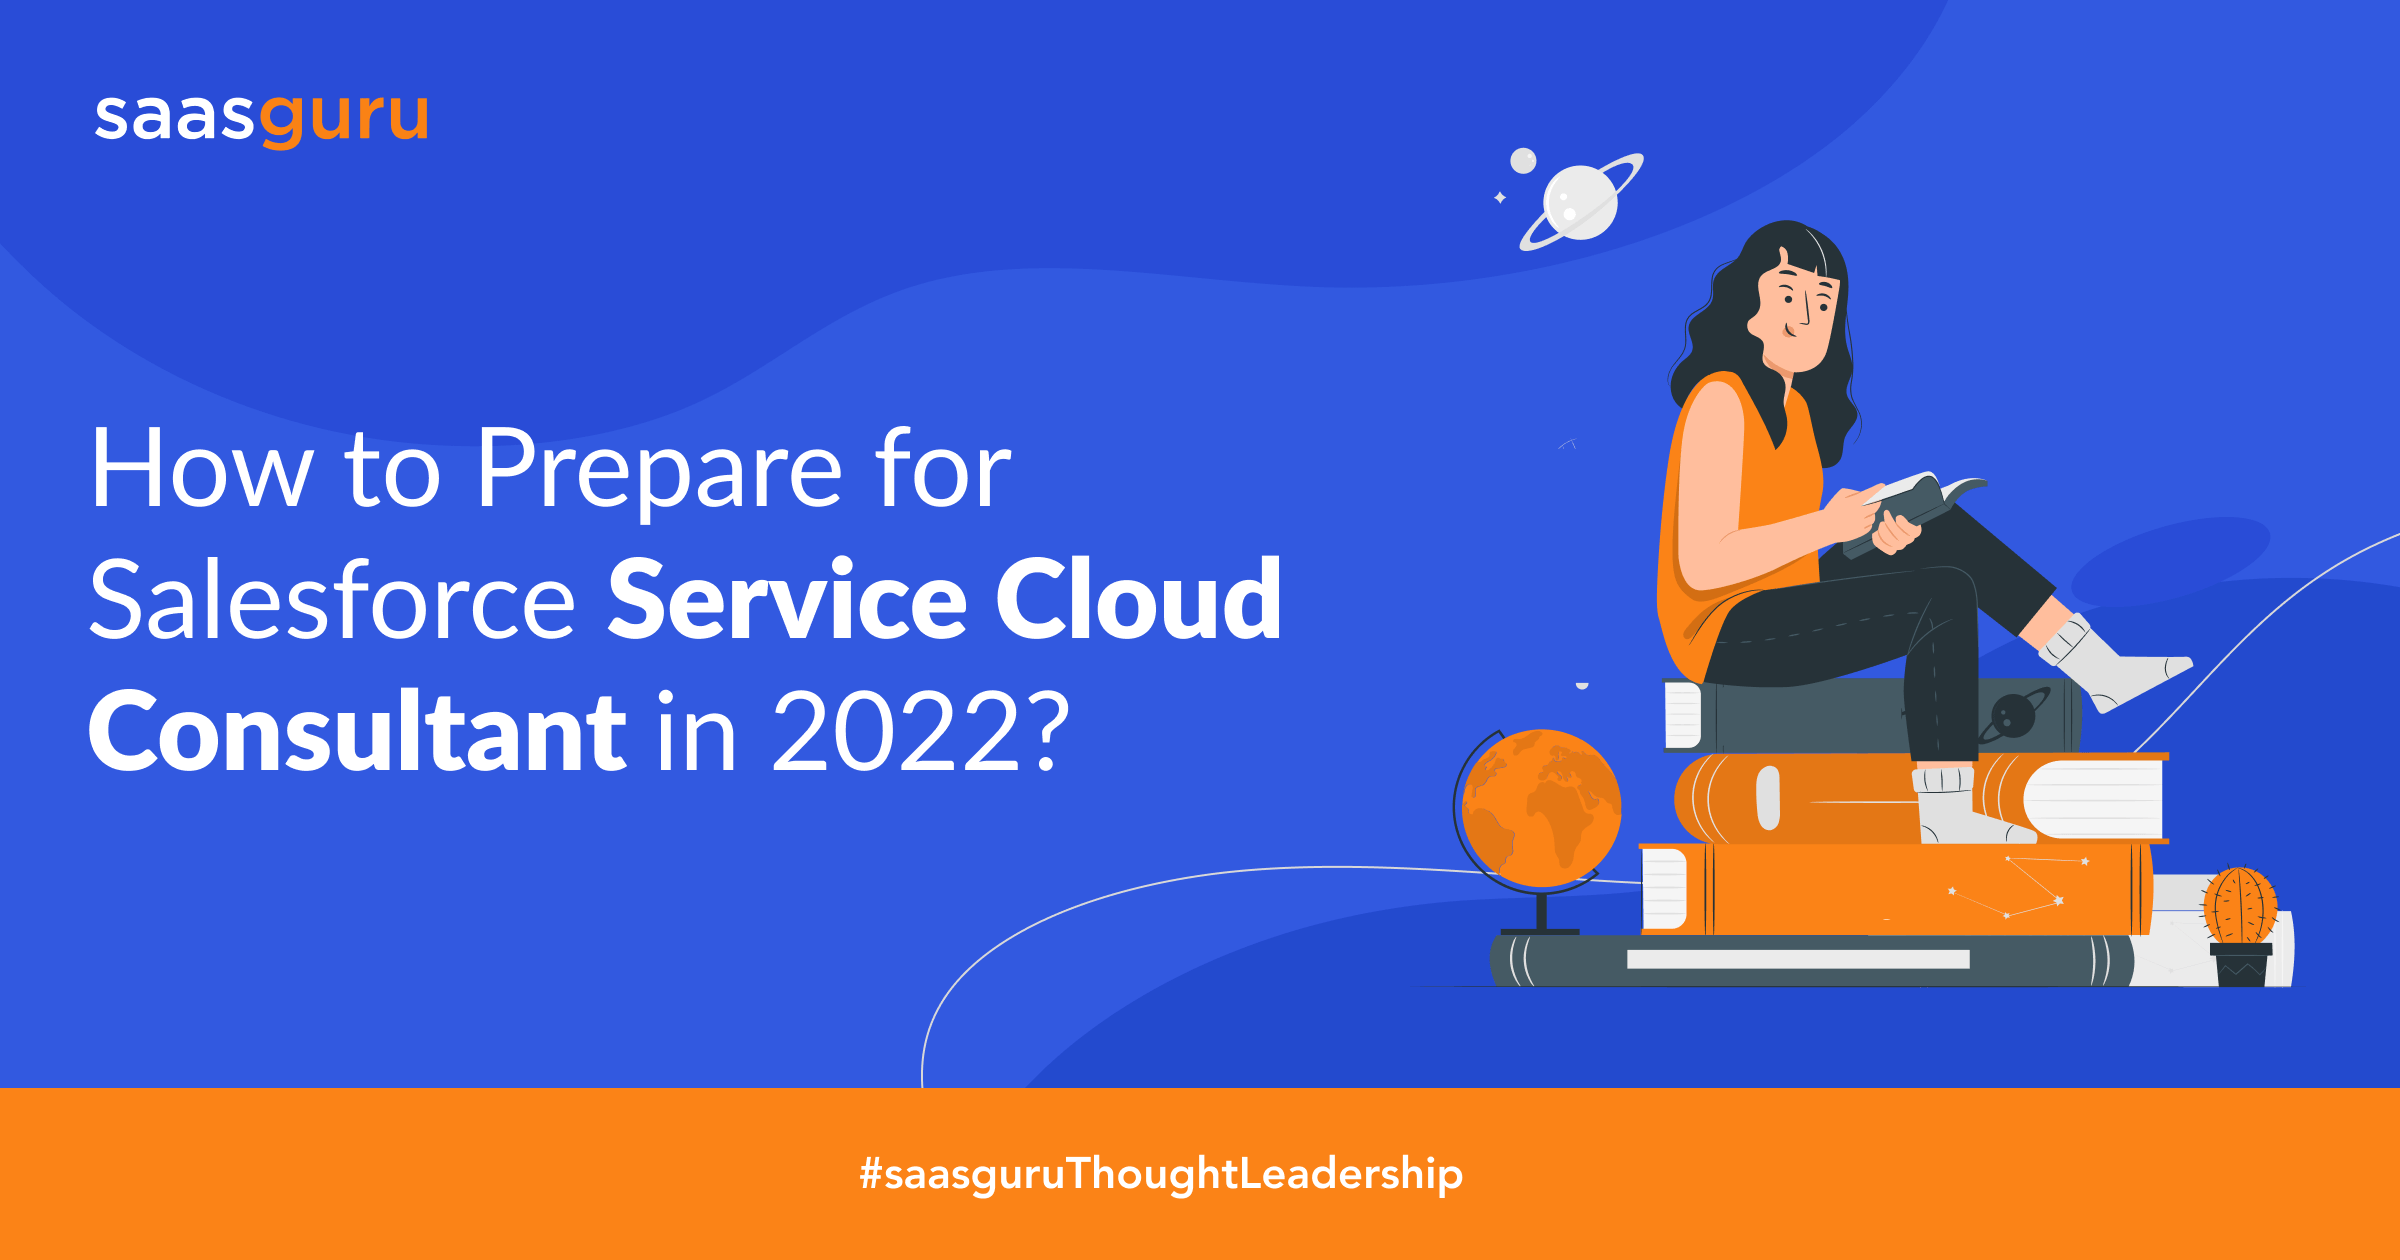 How to Prepare for Salesforce Service Cloud Consultant?